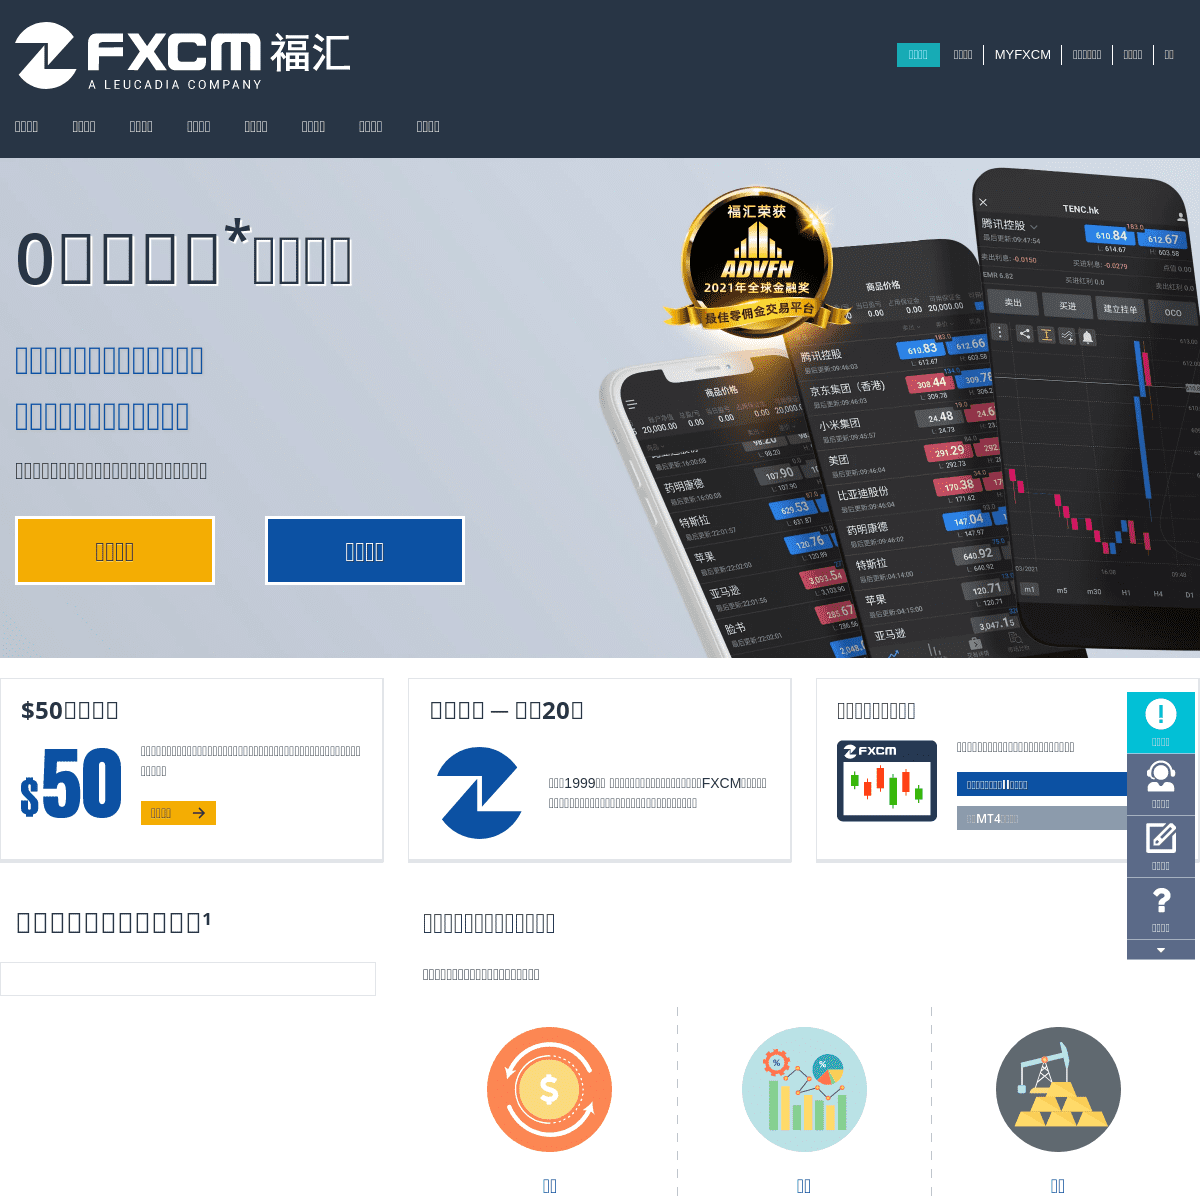 A complete backup of https://fxcm-chinese.com